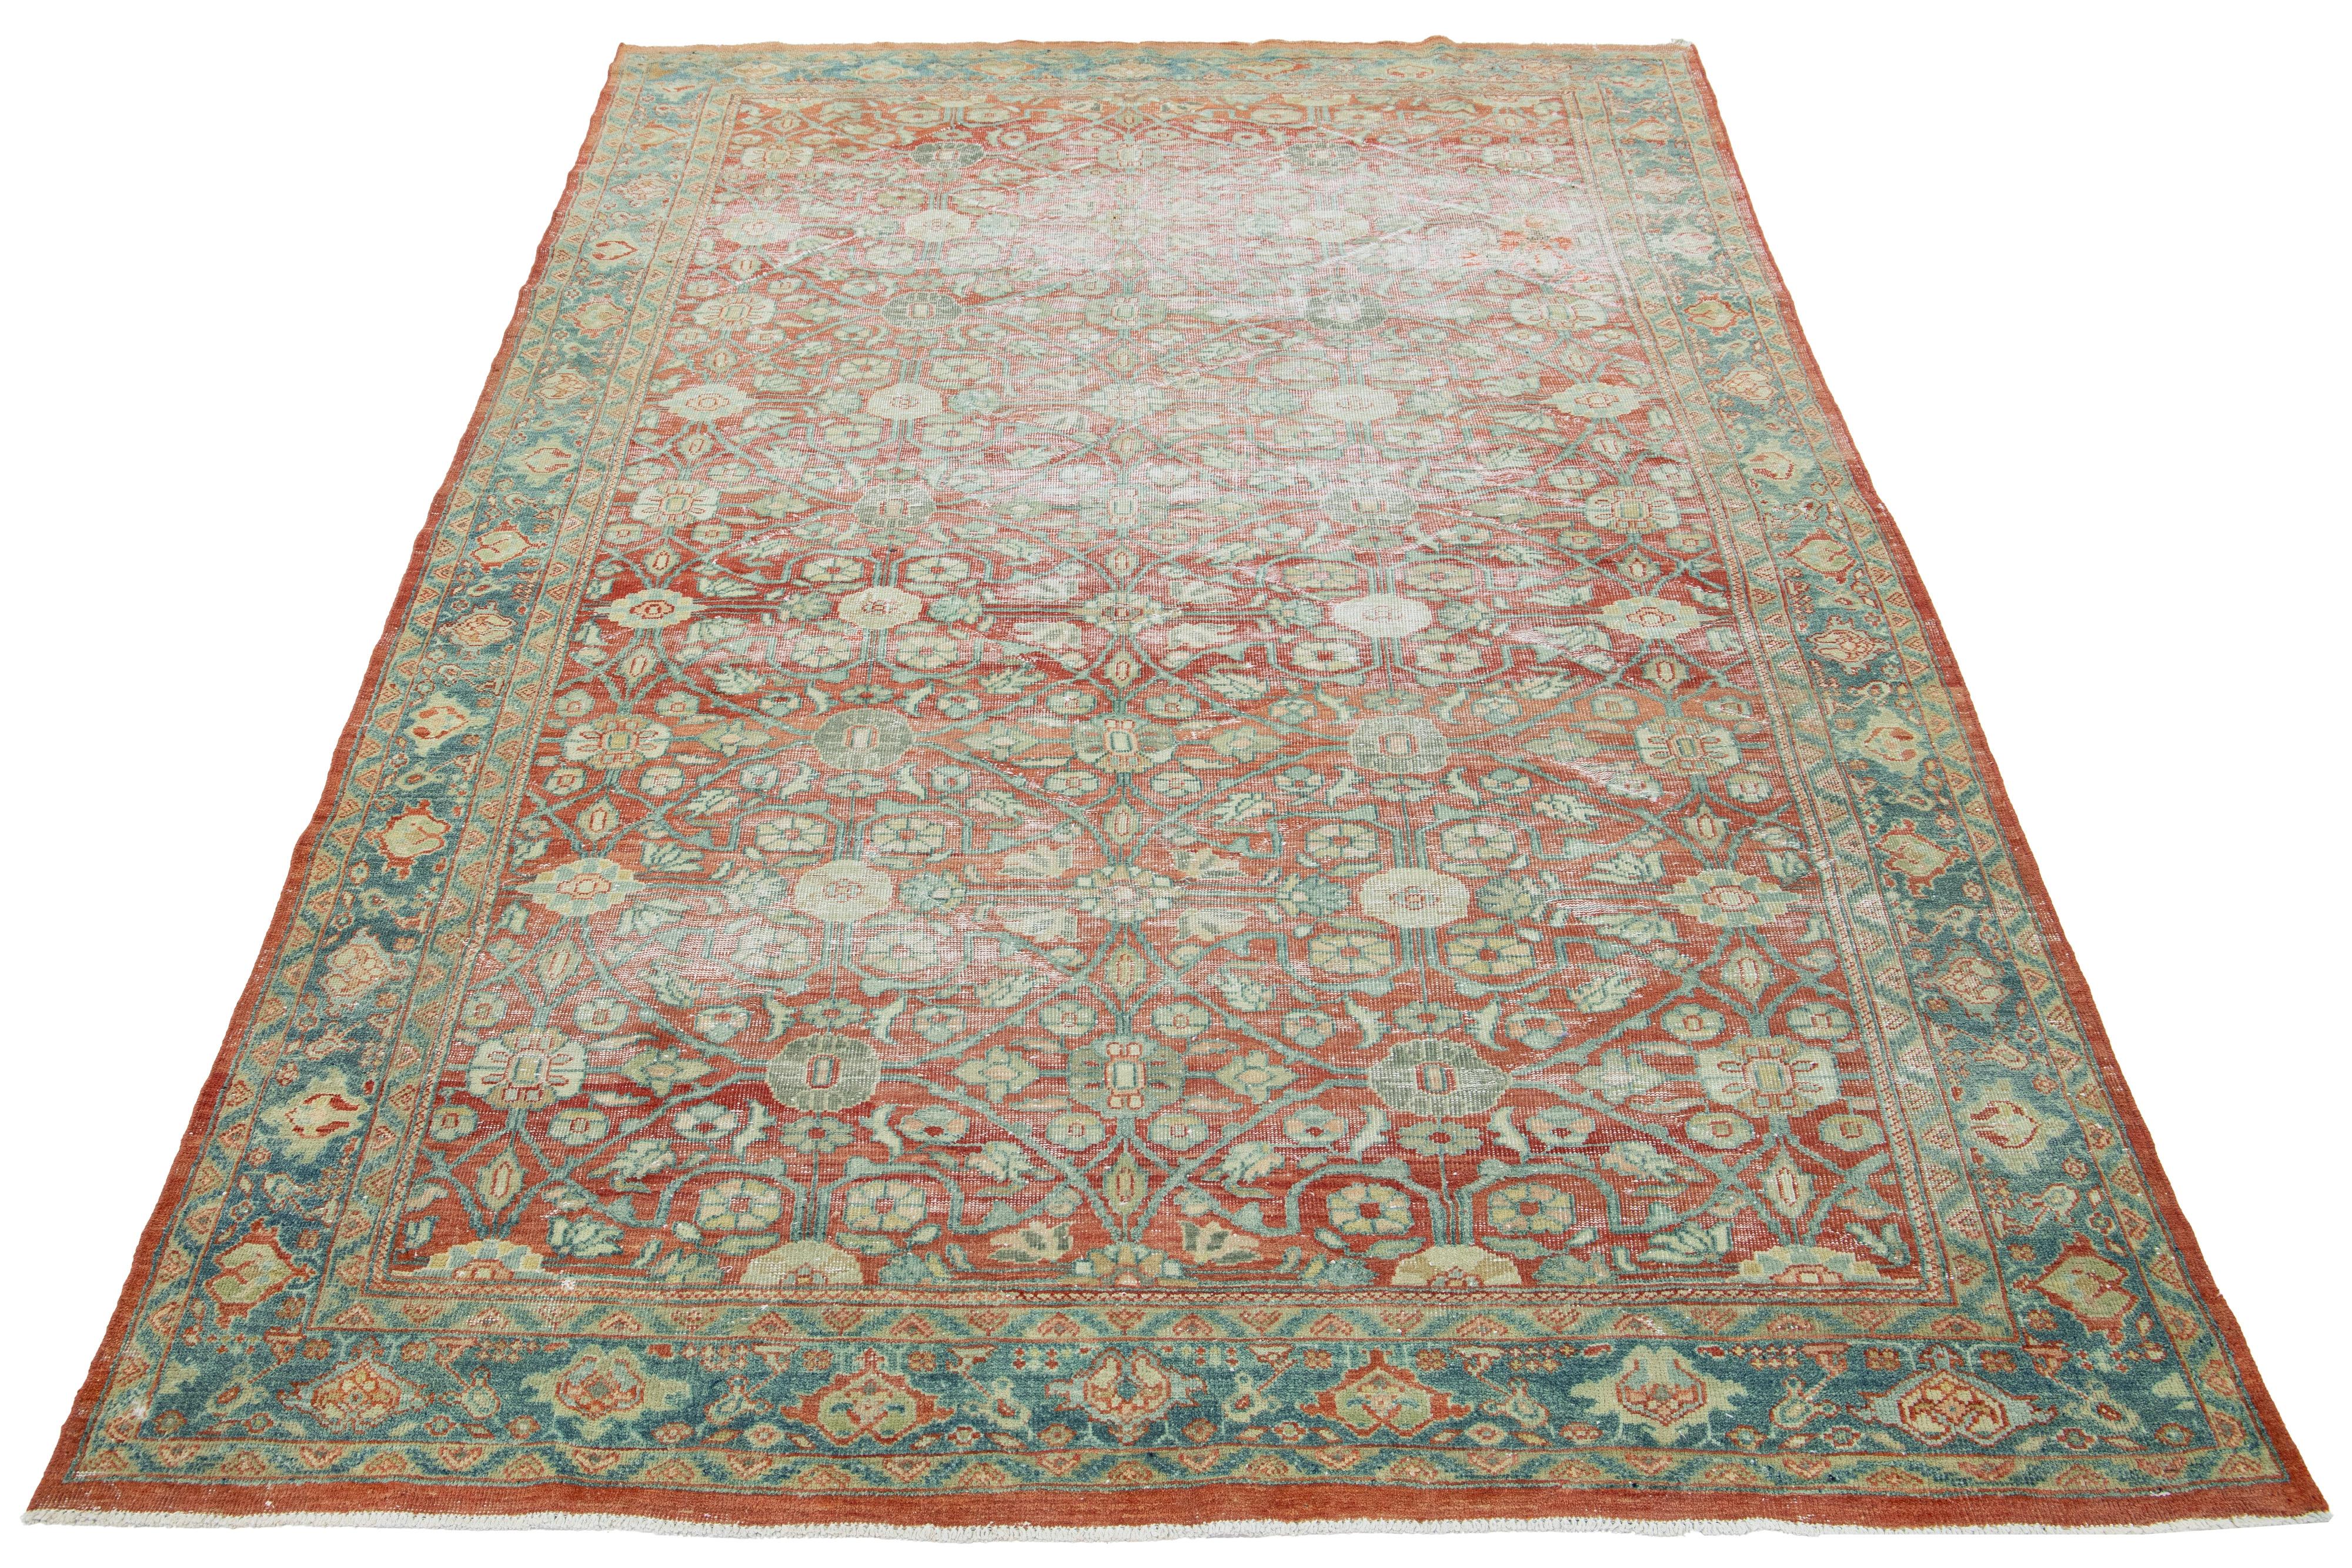 This Persian Tabriz wool rug is handcrafted with an all-over floral pattern in peach, light blue, and beige, on a red background that accentuates the design.

This rug measures  6'6